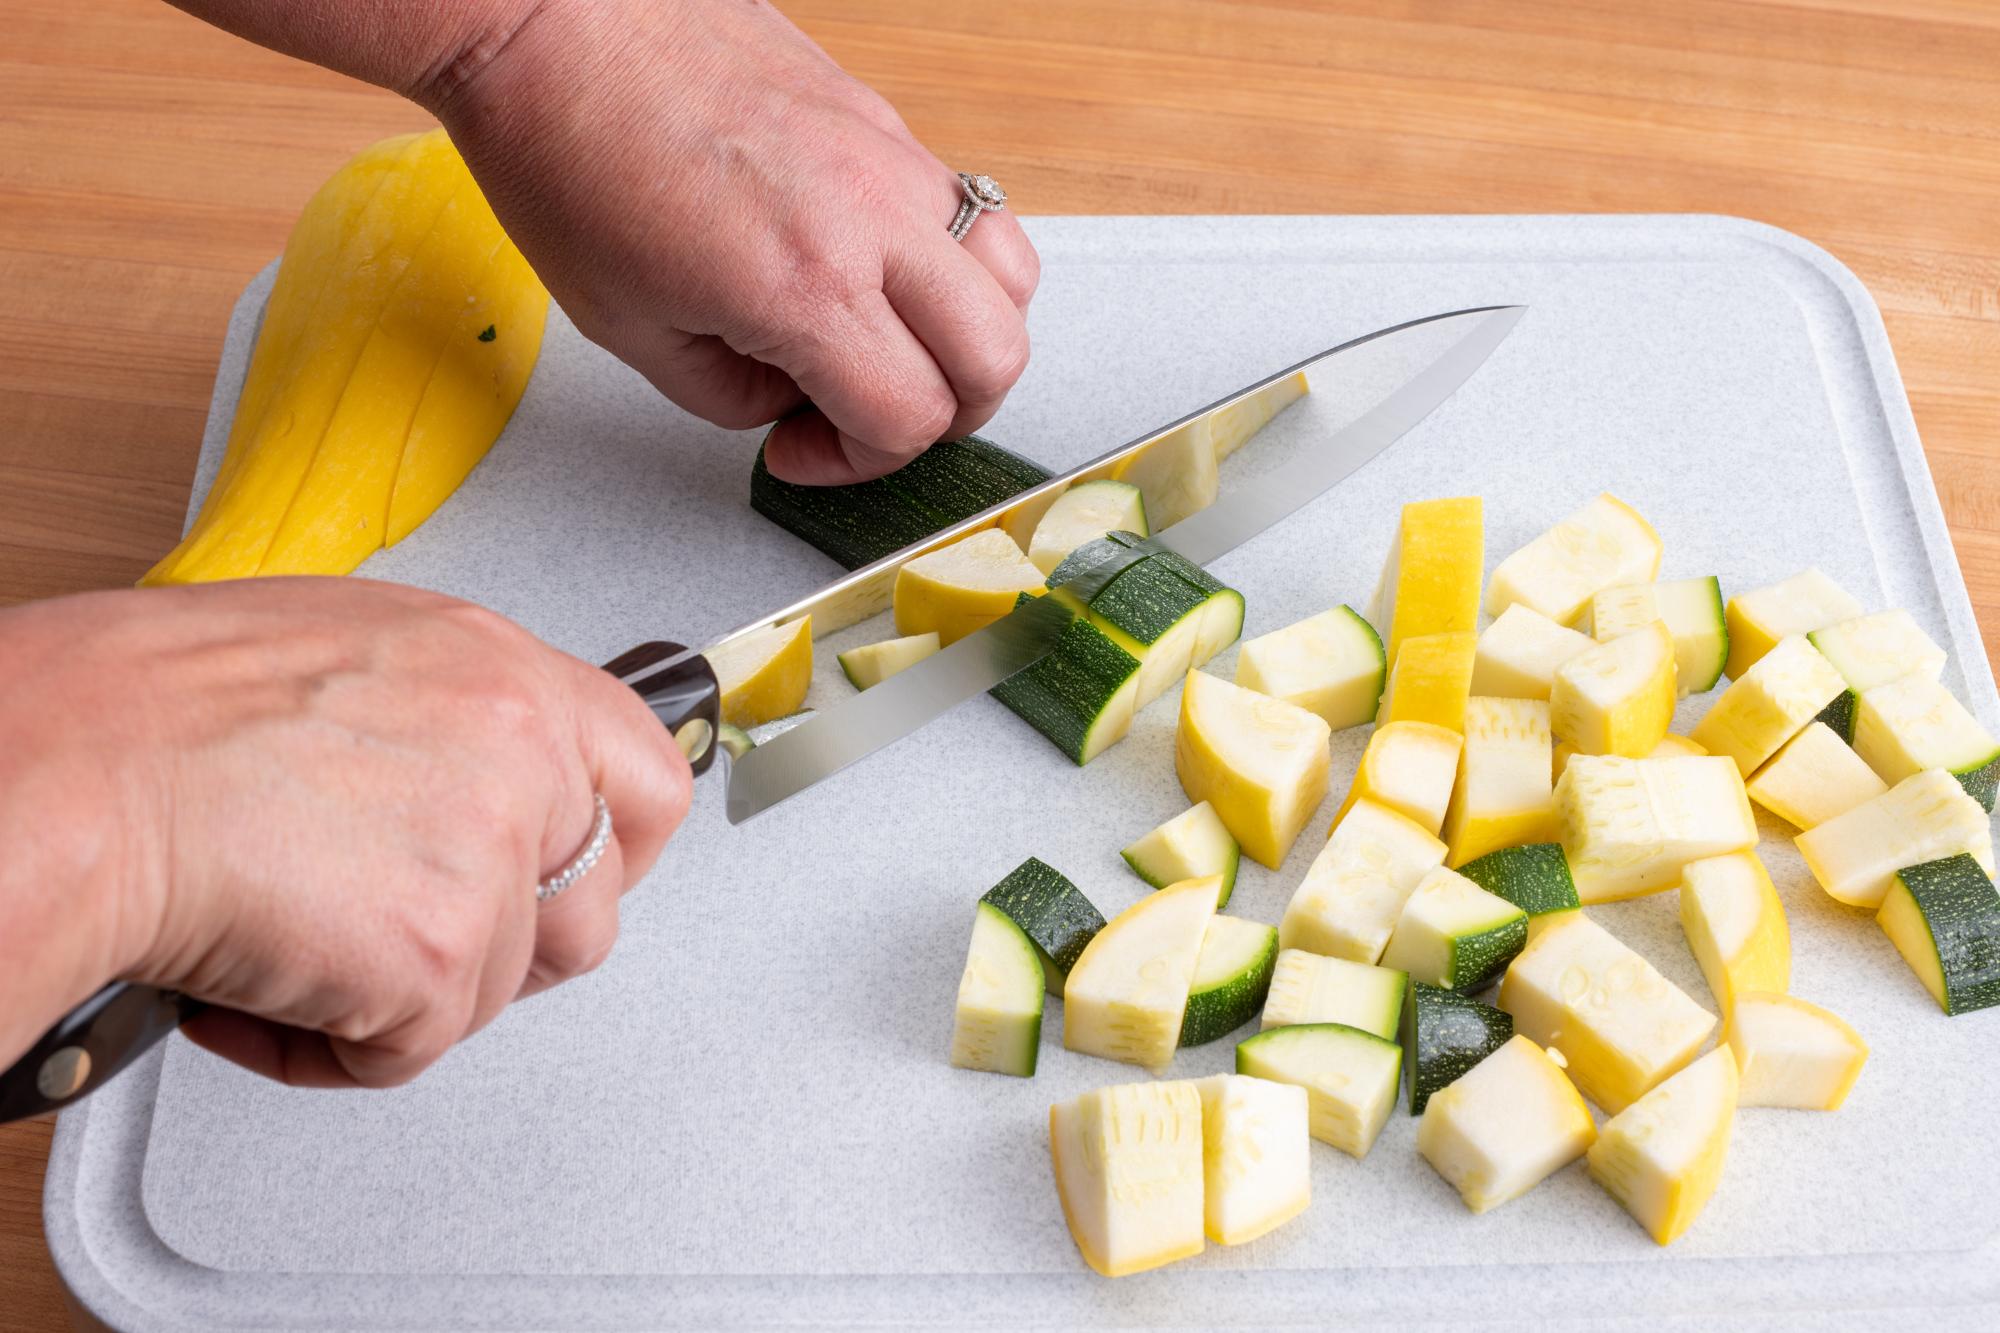 French Chef knife dicing zucchini and yellow squash.